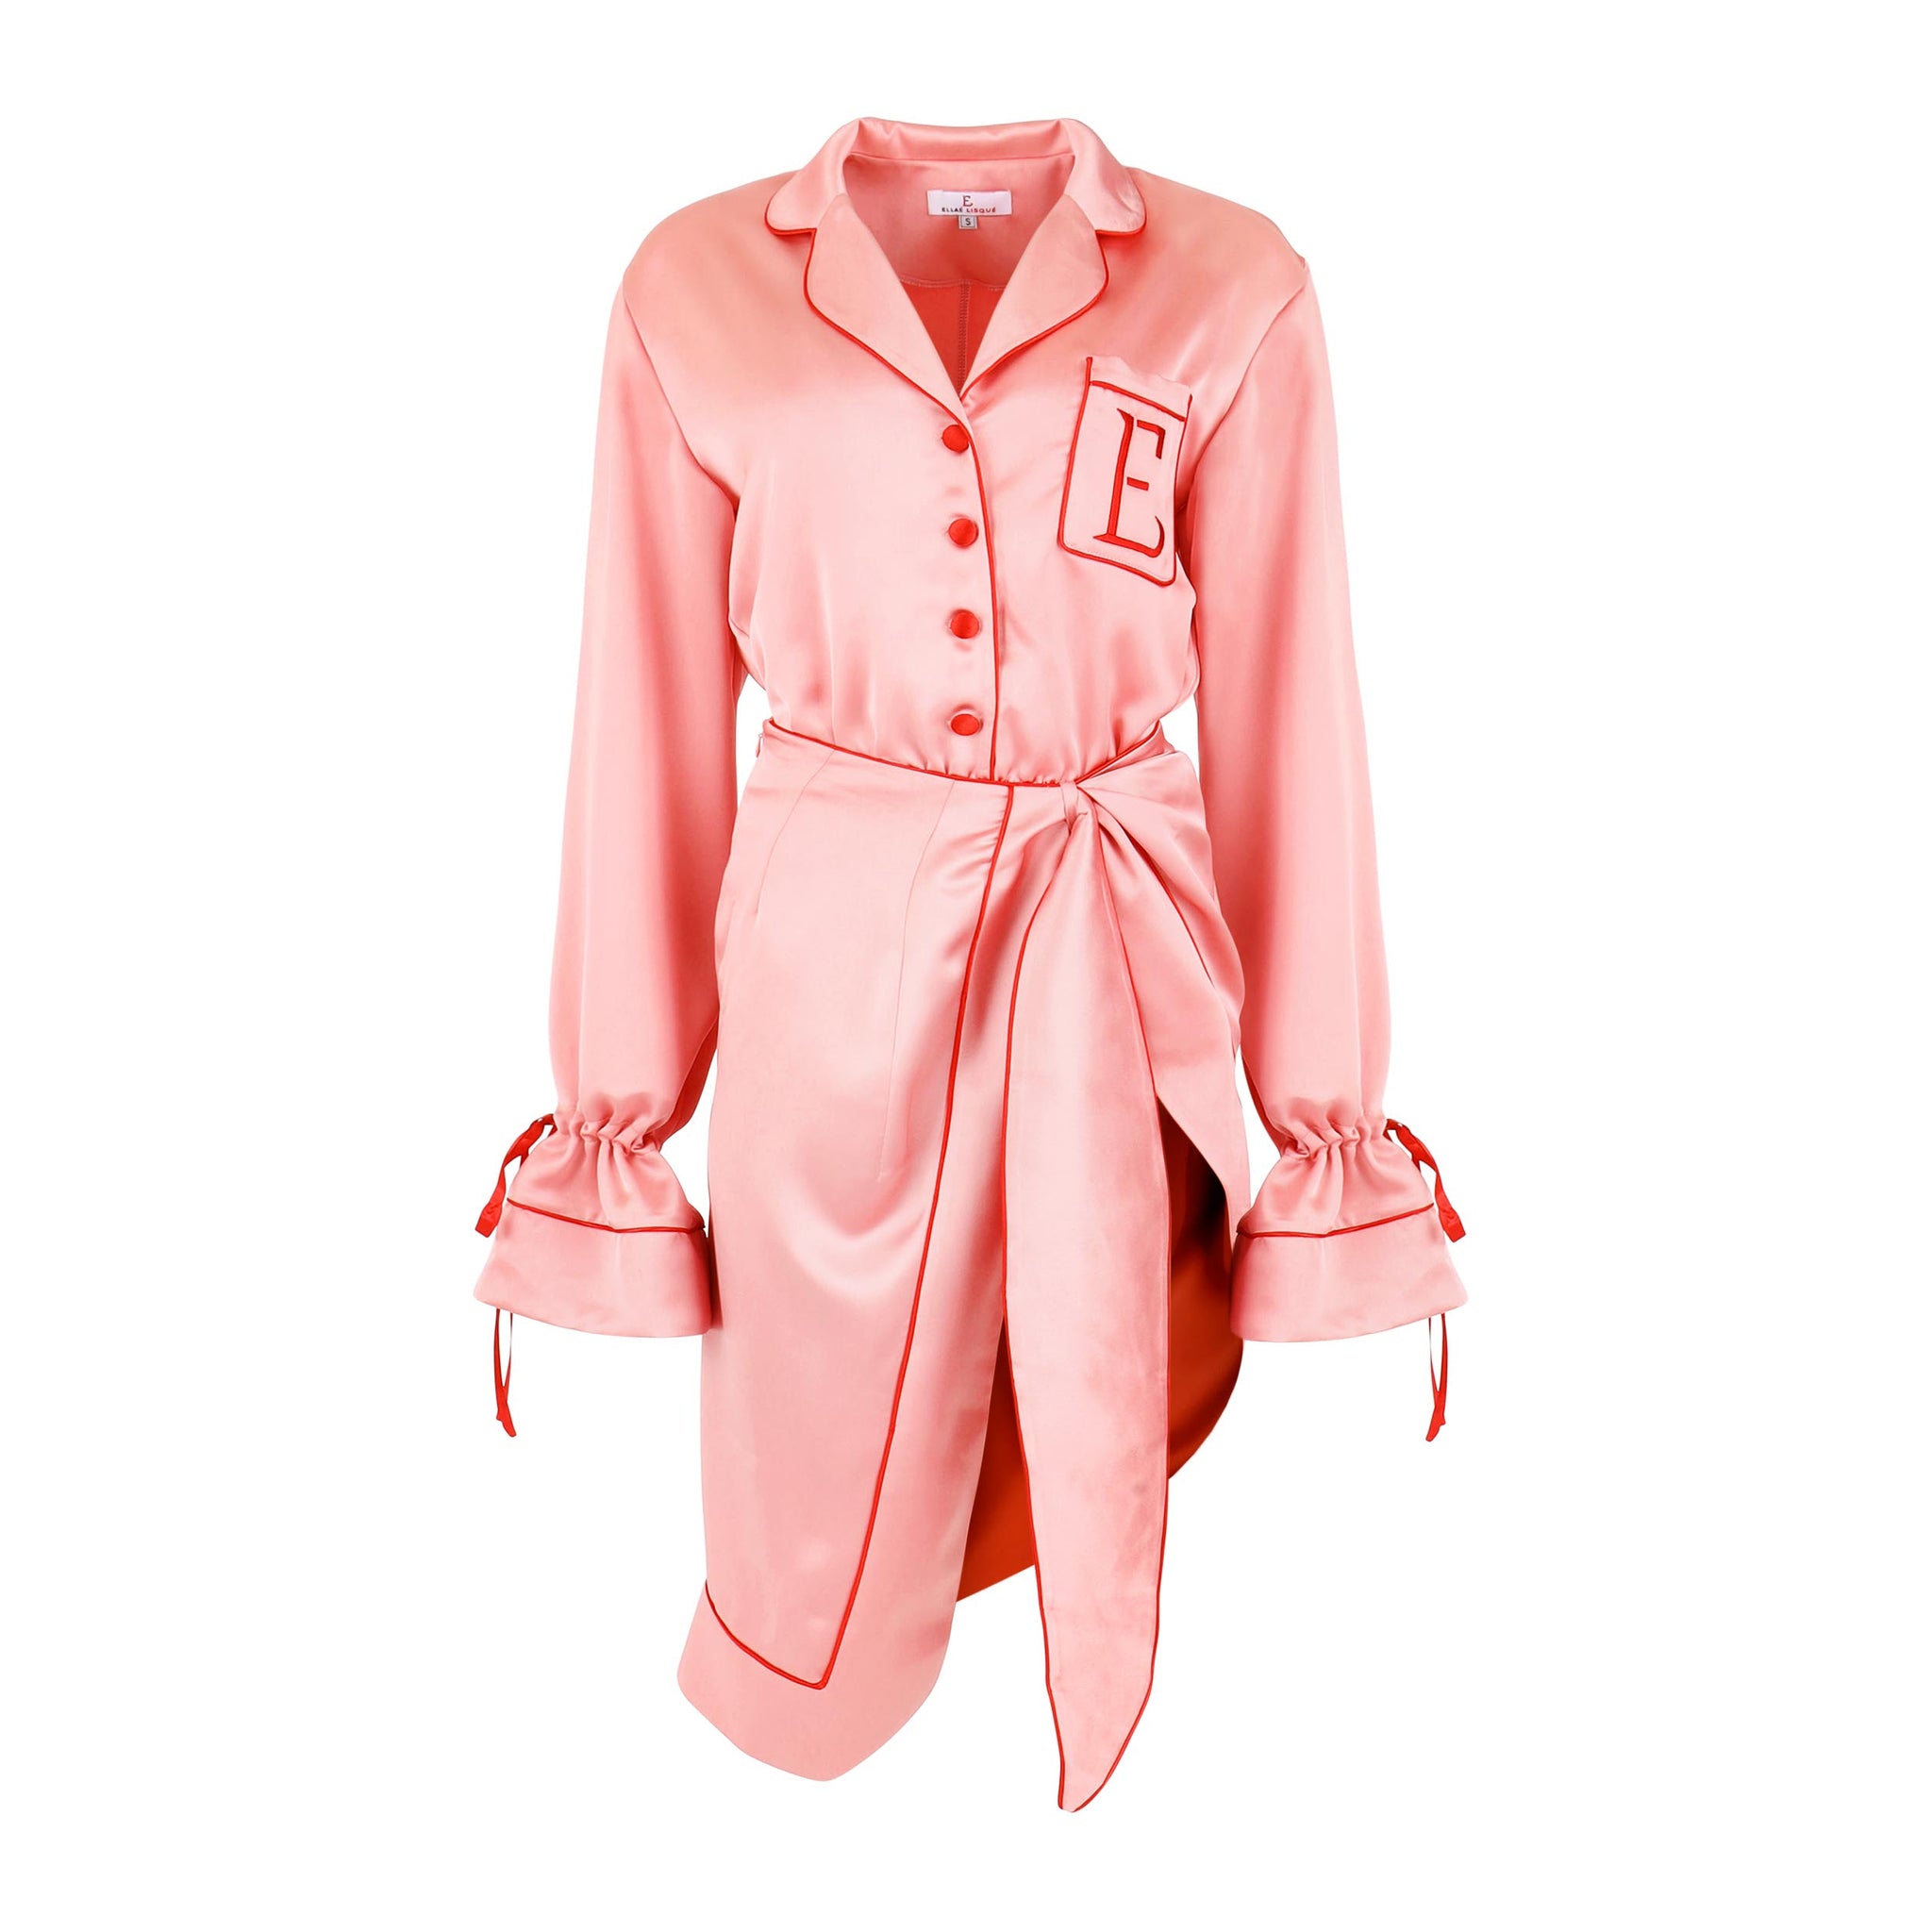 Date Night With Bae - Pink Satin Set